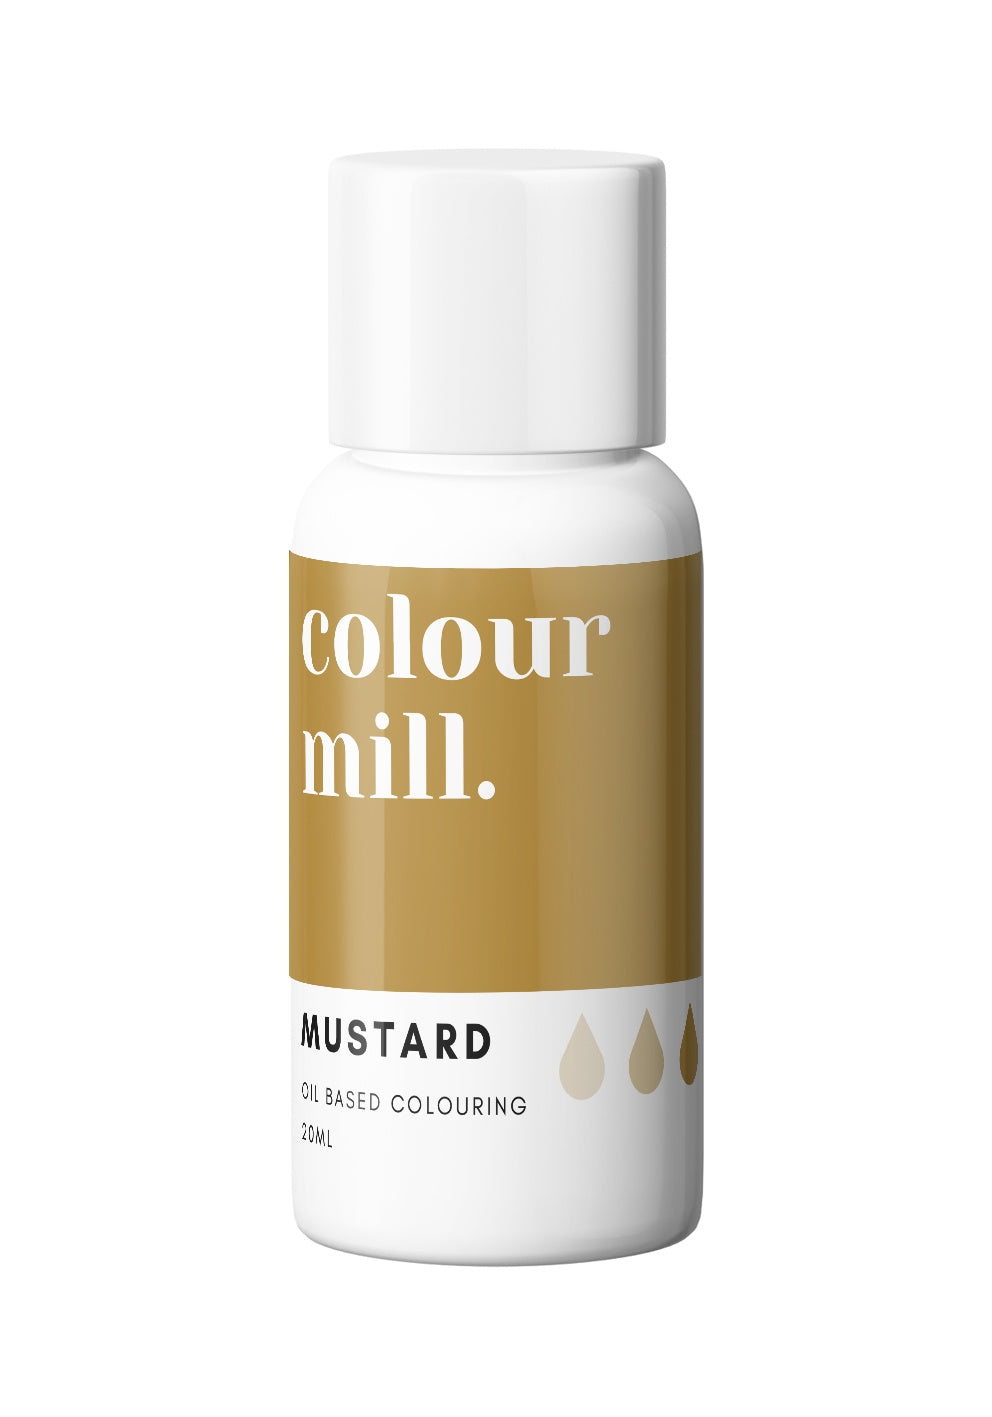 Colour Mill Oil Based Colouring 20ml - Mustard